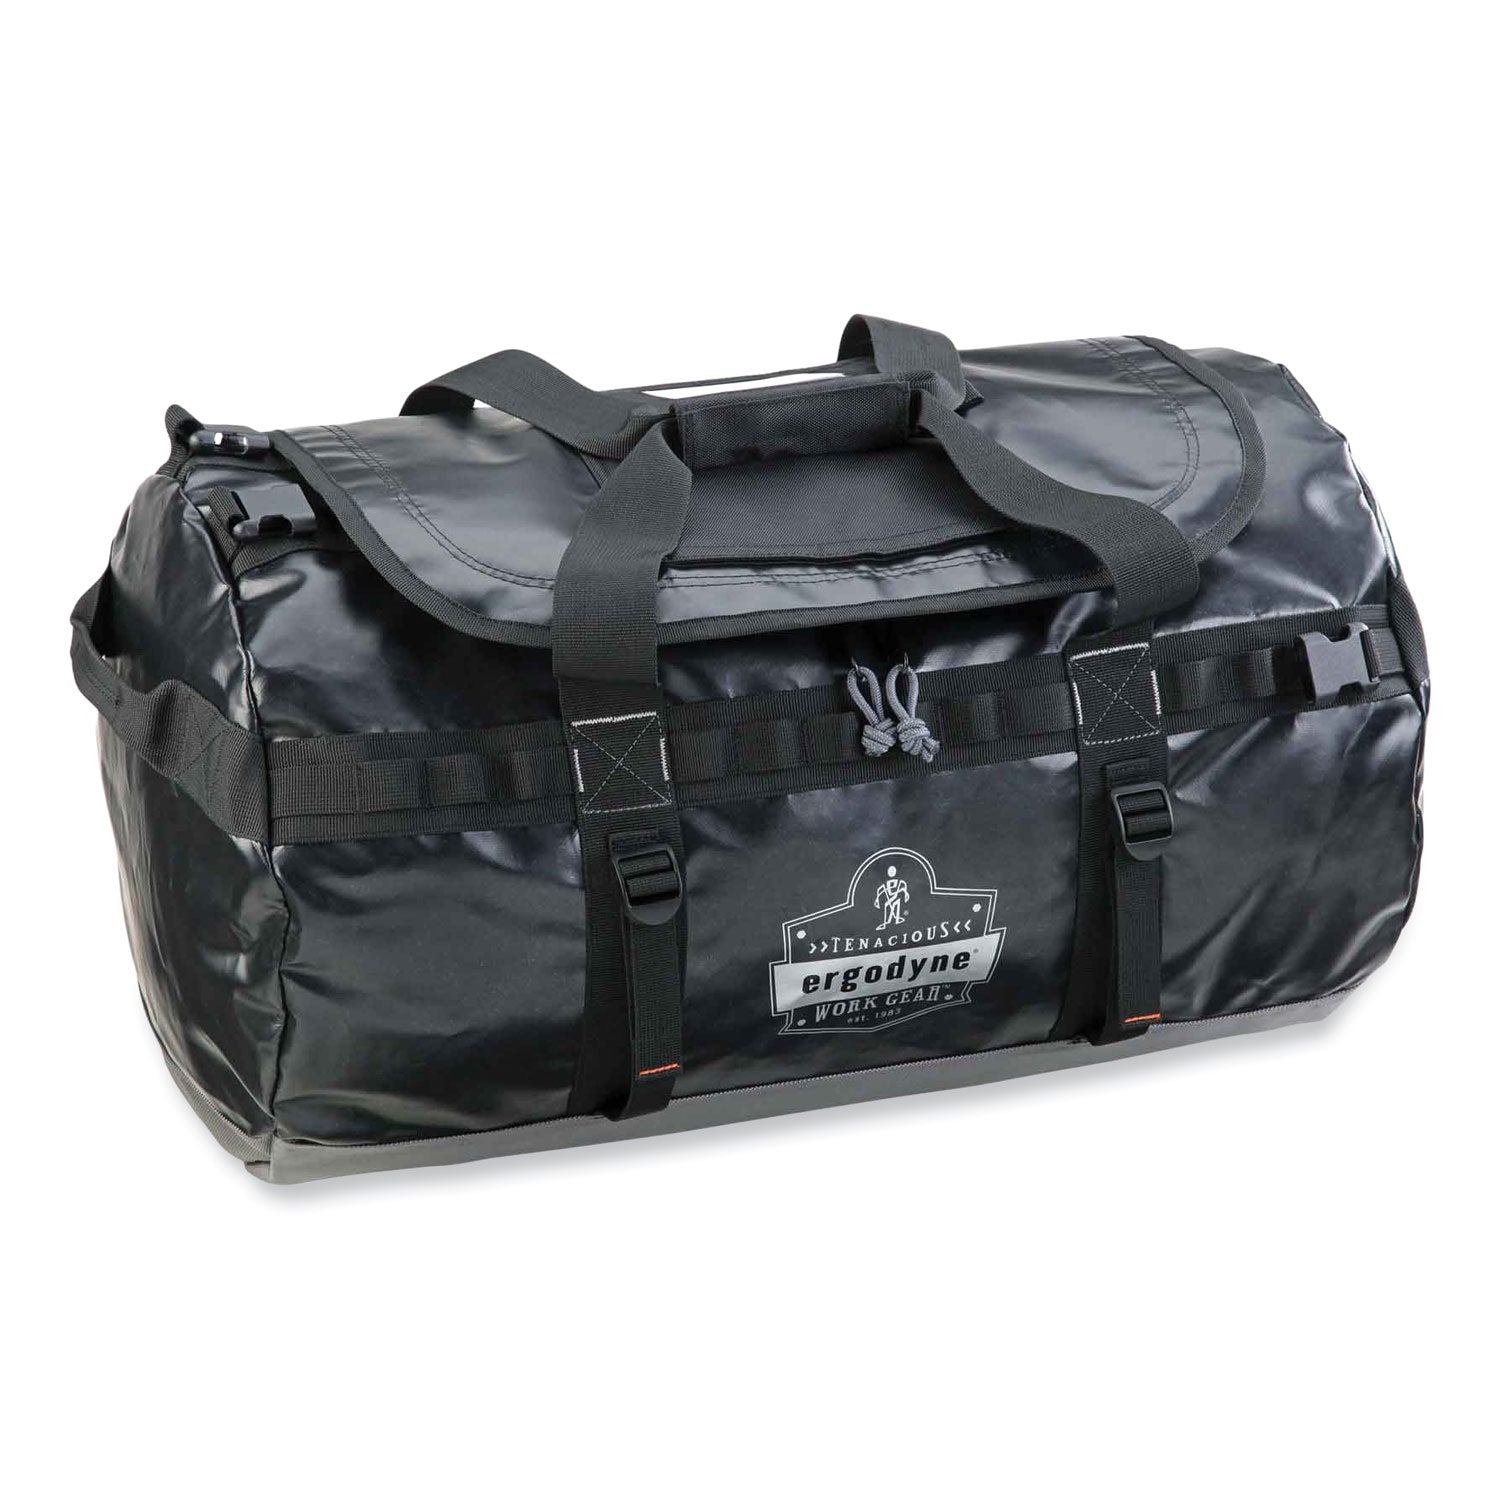 arsenal-5030-water-resistant-duffel-bag-small-135-x-235-x-135-black-ships-in-1-3-business-days_ego13030 - 1